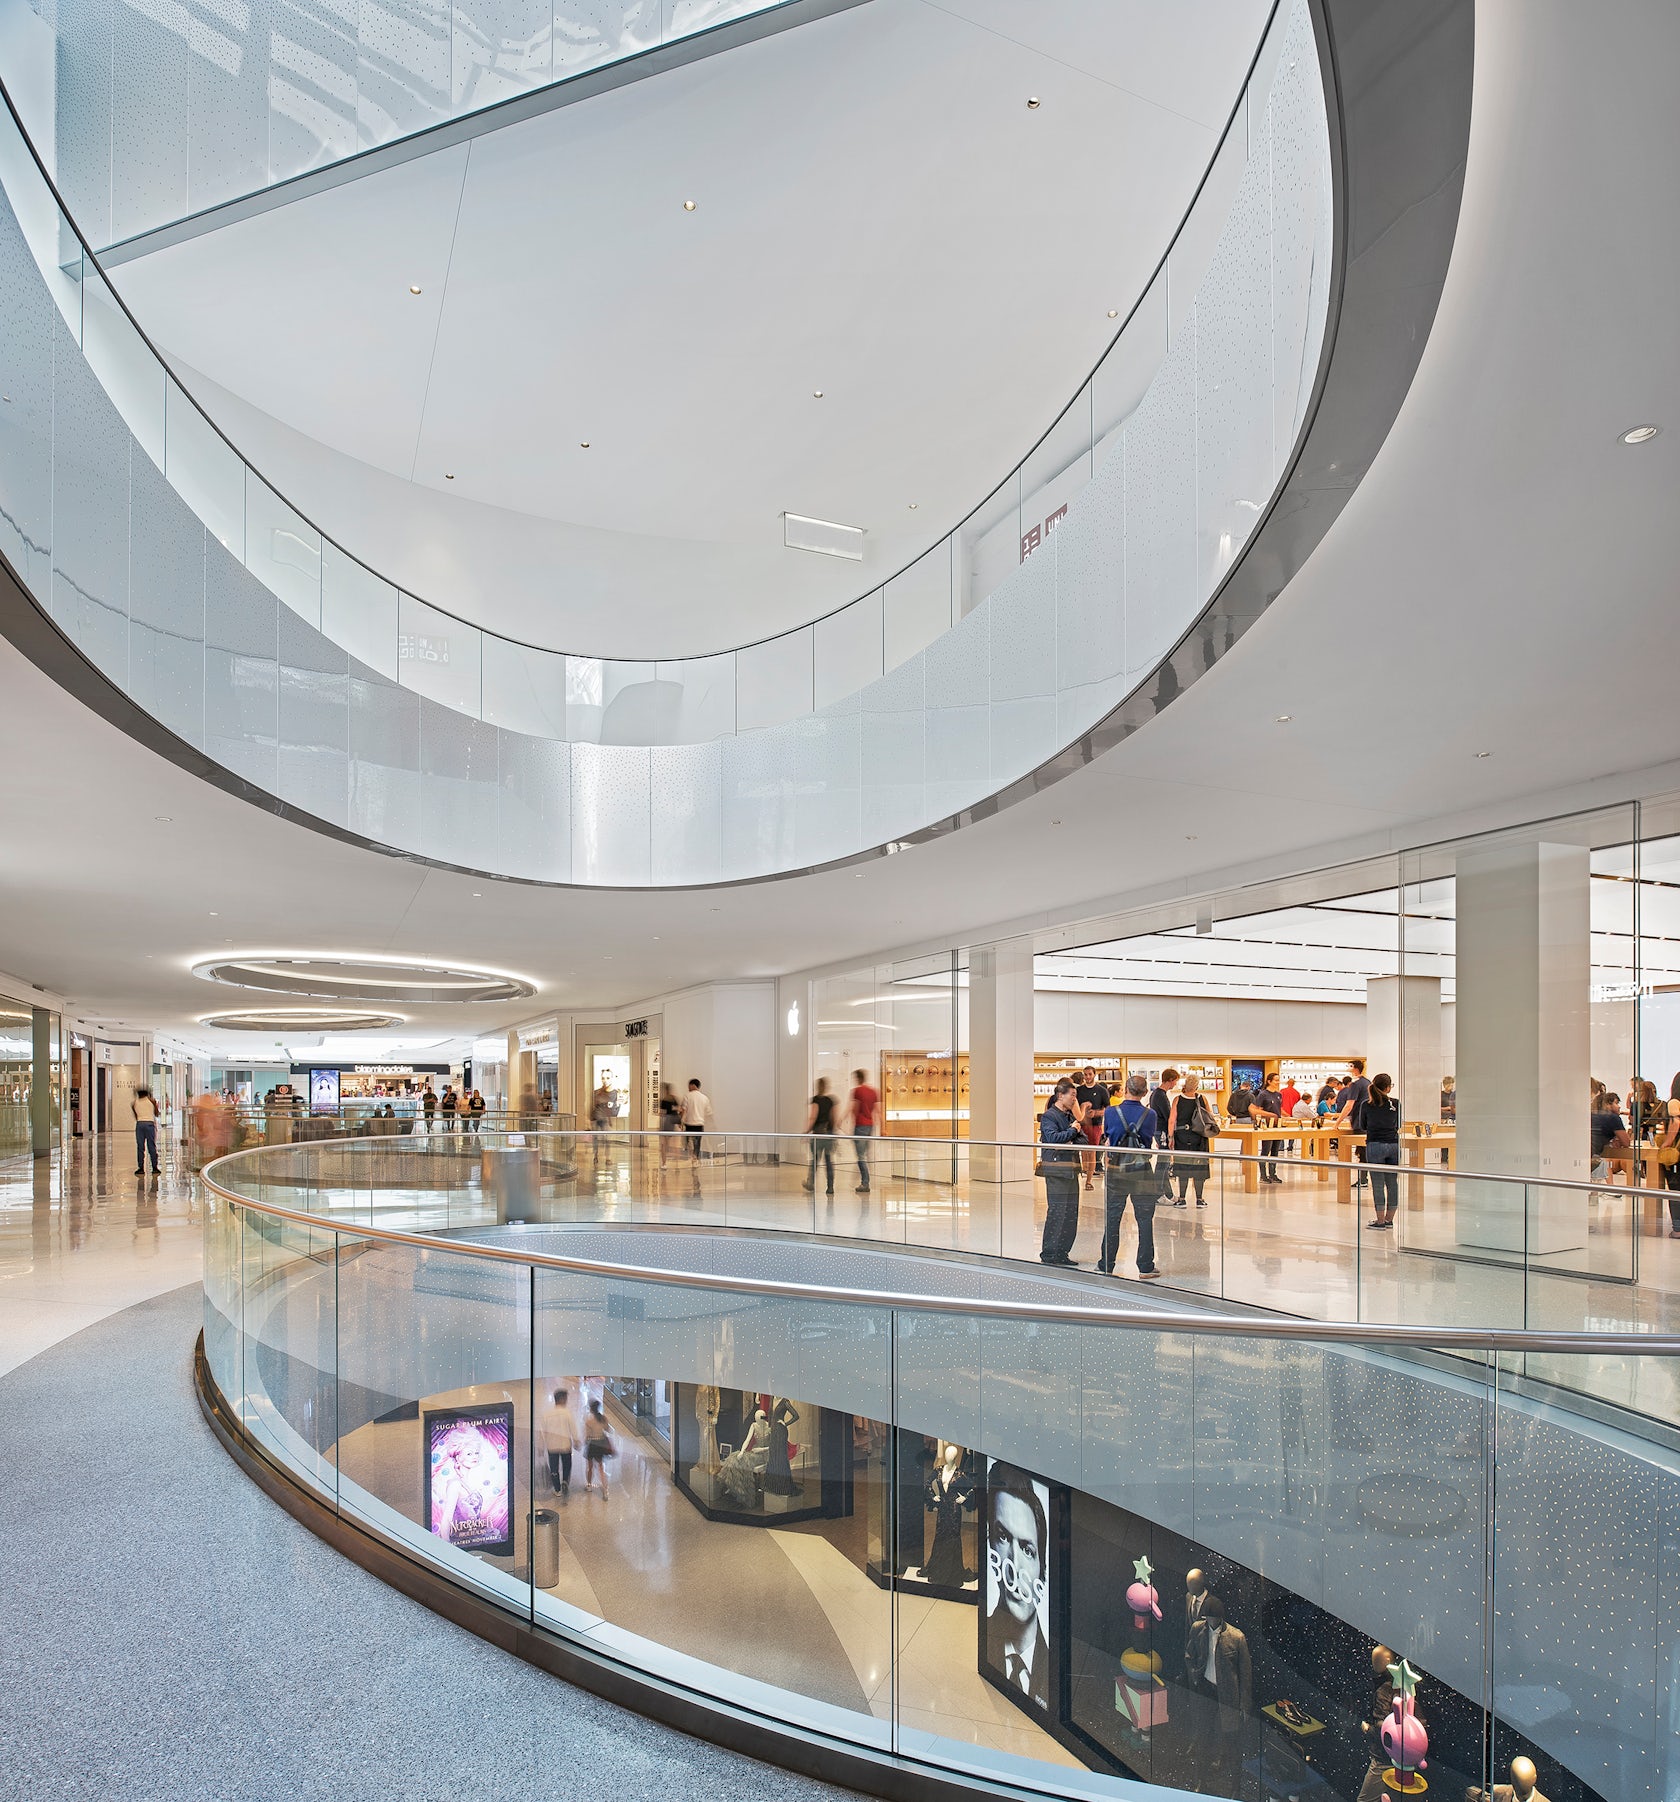 fuksas completes renovation of the beverly center in los angeles with a  dynamic wavy façade